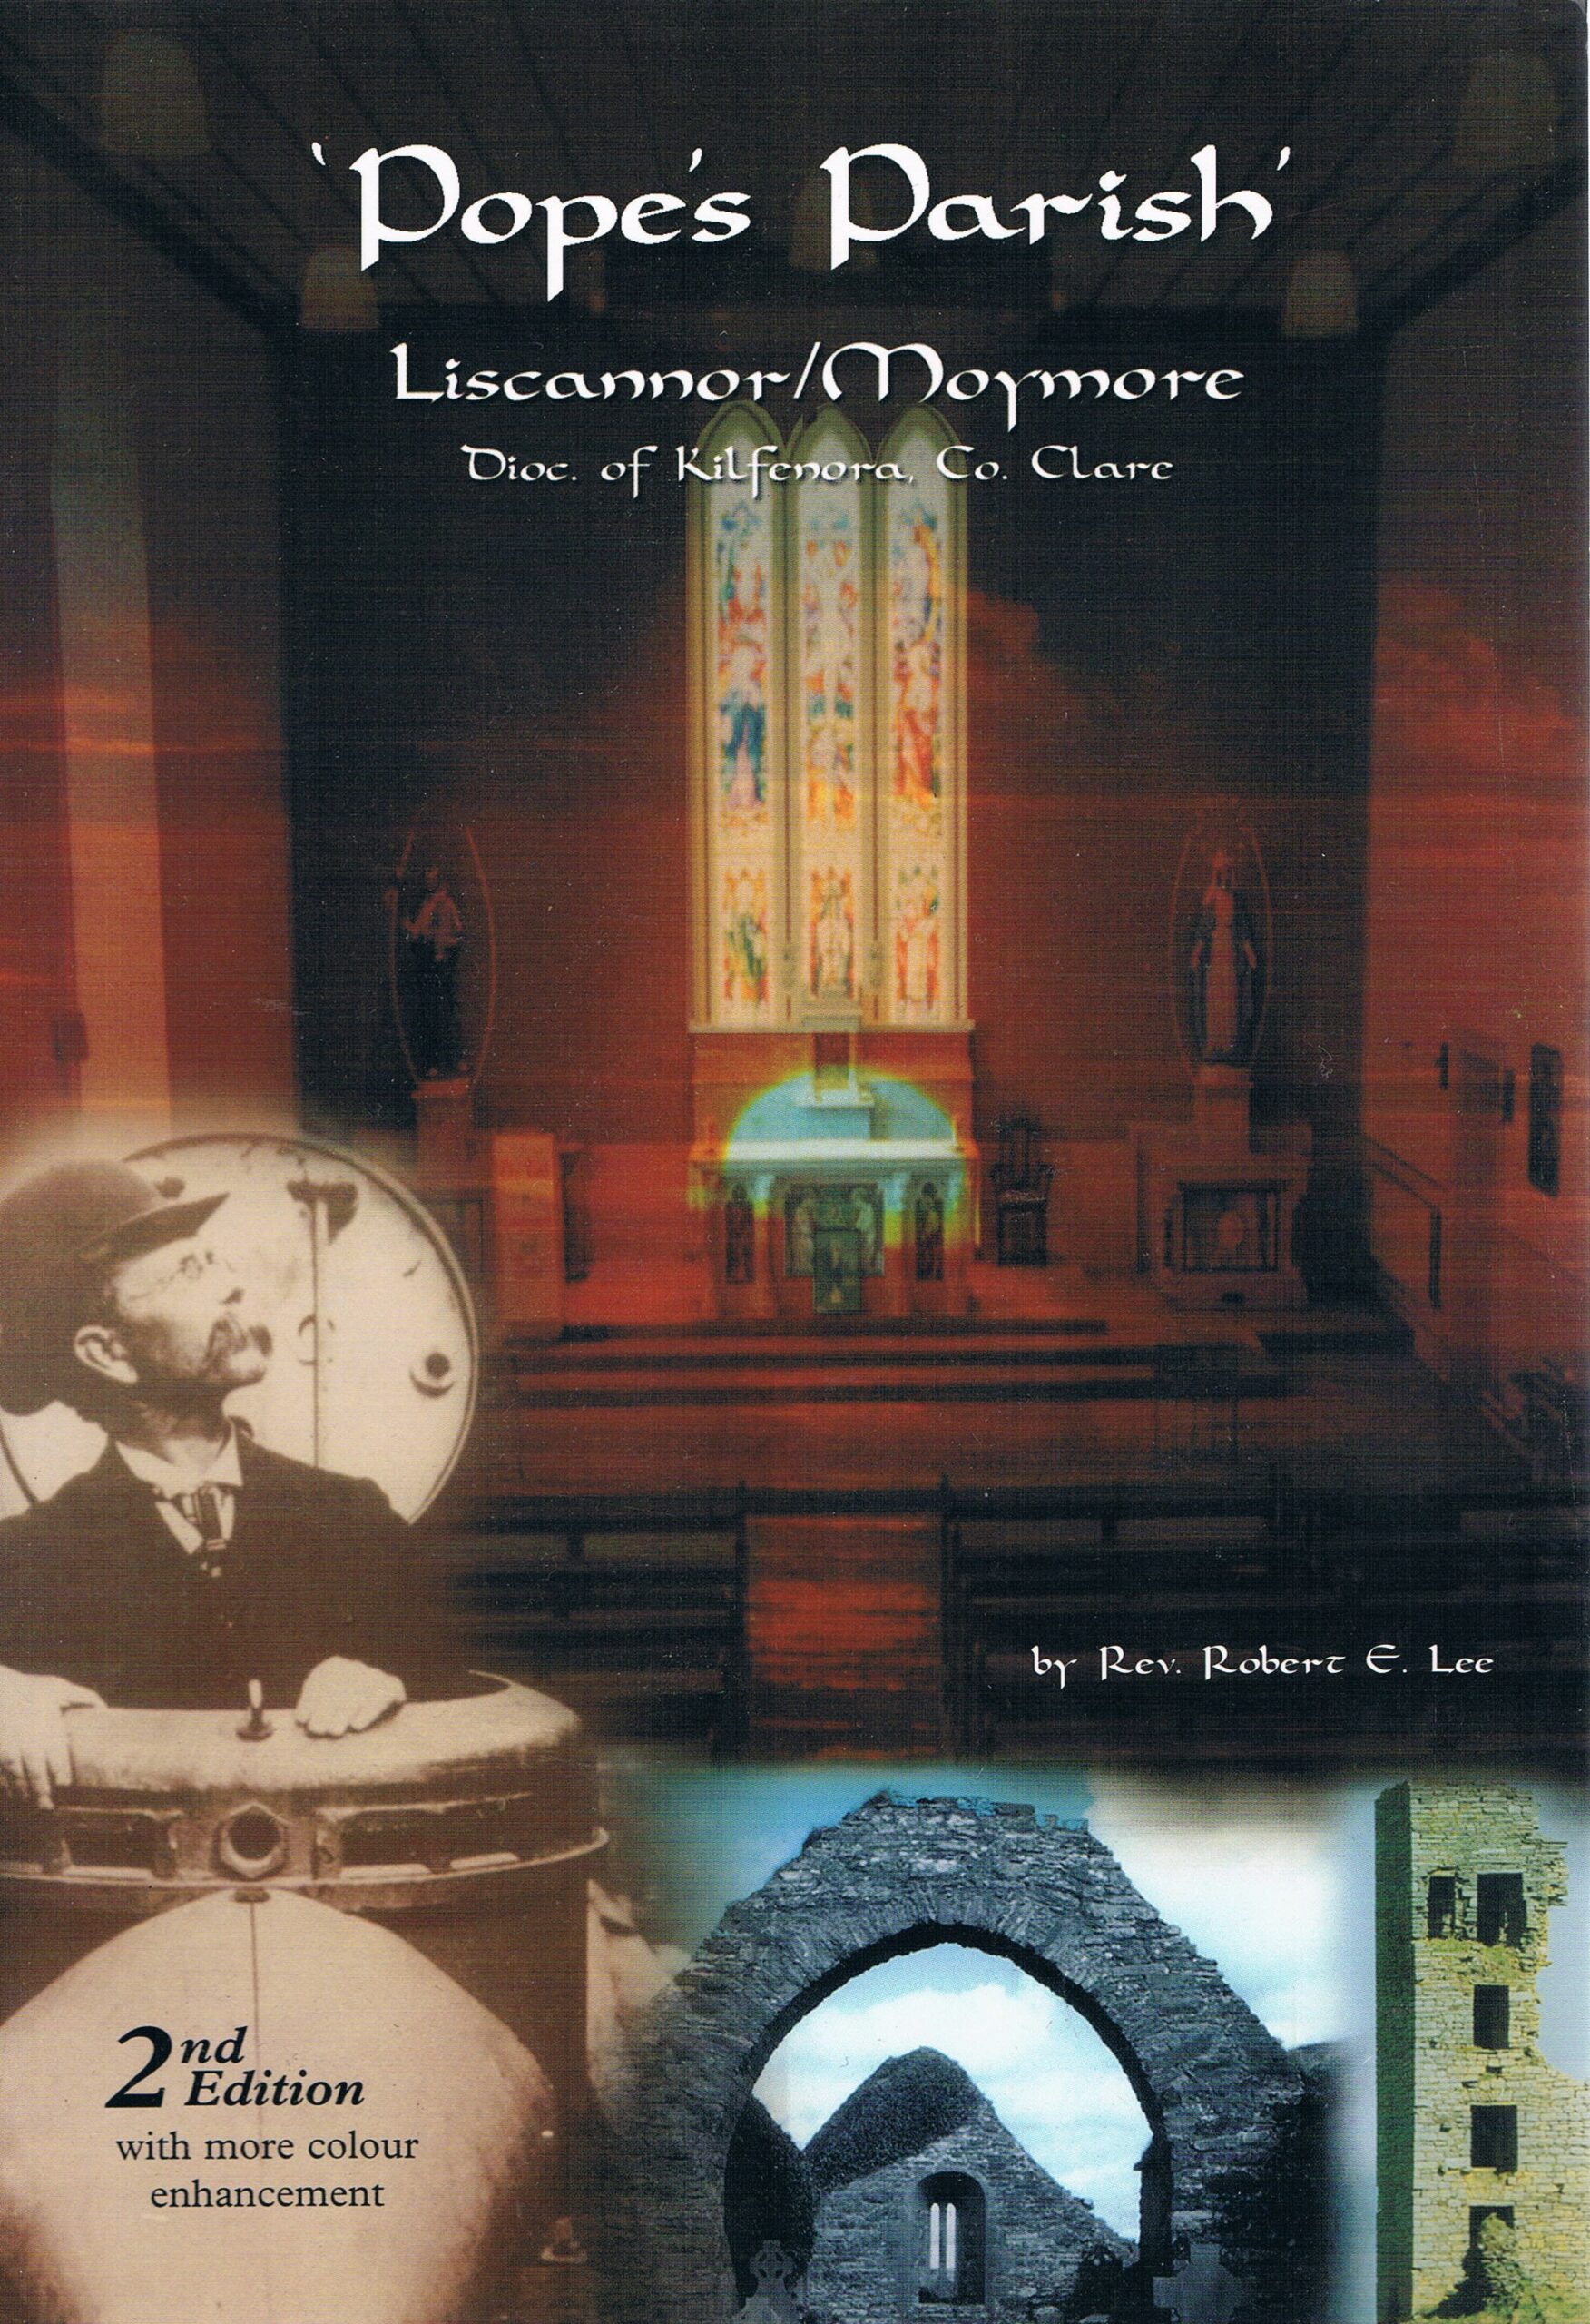 ‘Pope’s Parish’   Liscannor/Moymore  Dioc. of Kilfenora, Co. Clare by Robert E. Lee